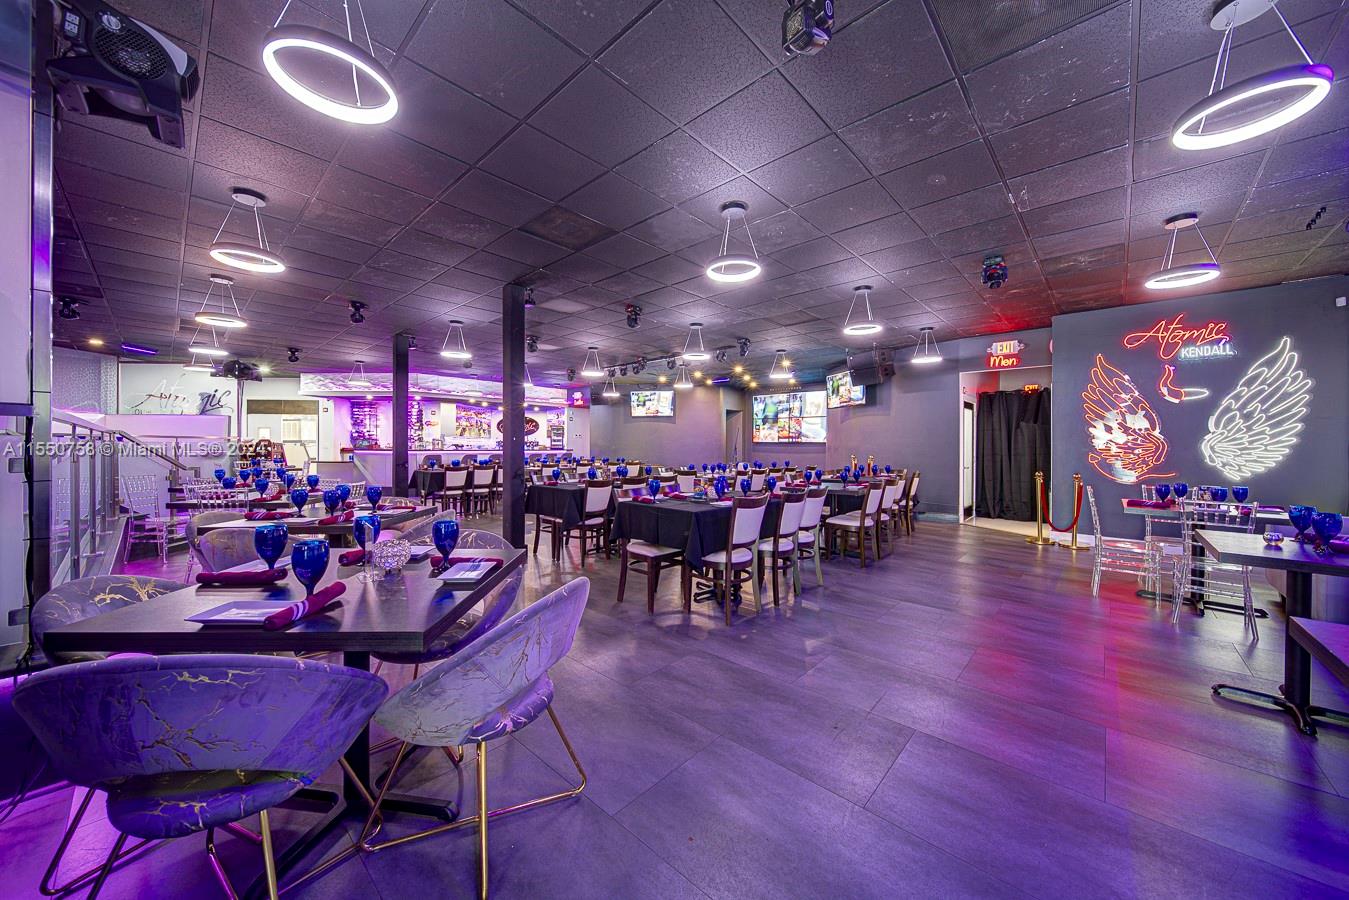   Lounge Bar For Sale in Kendall with Liquor License  For Sale A11550758, FL